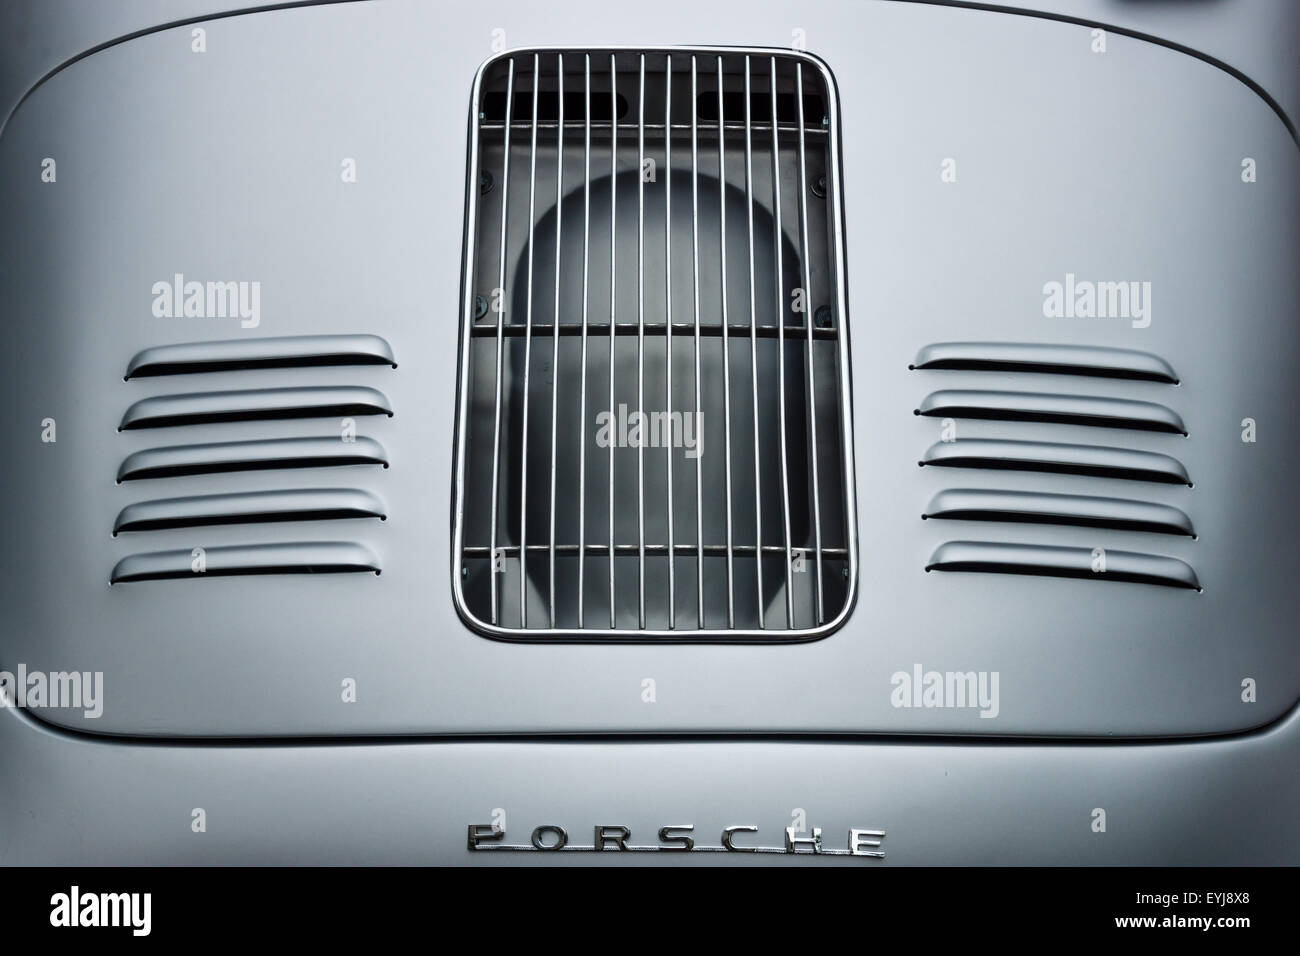 Air vents of the engine compartment of a sports car Porsche 356